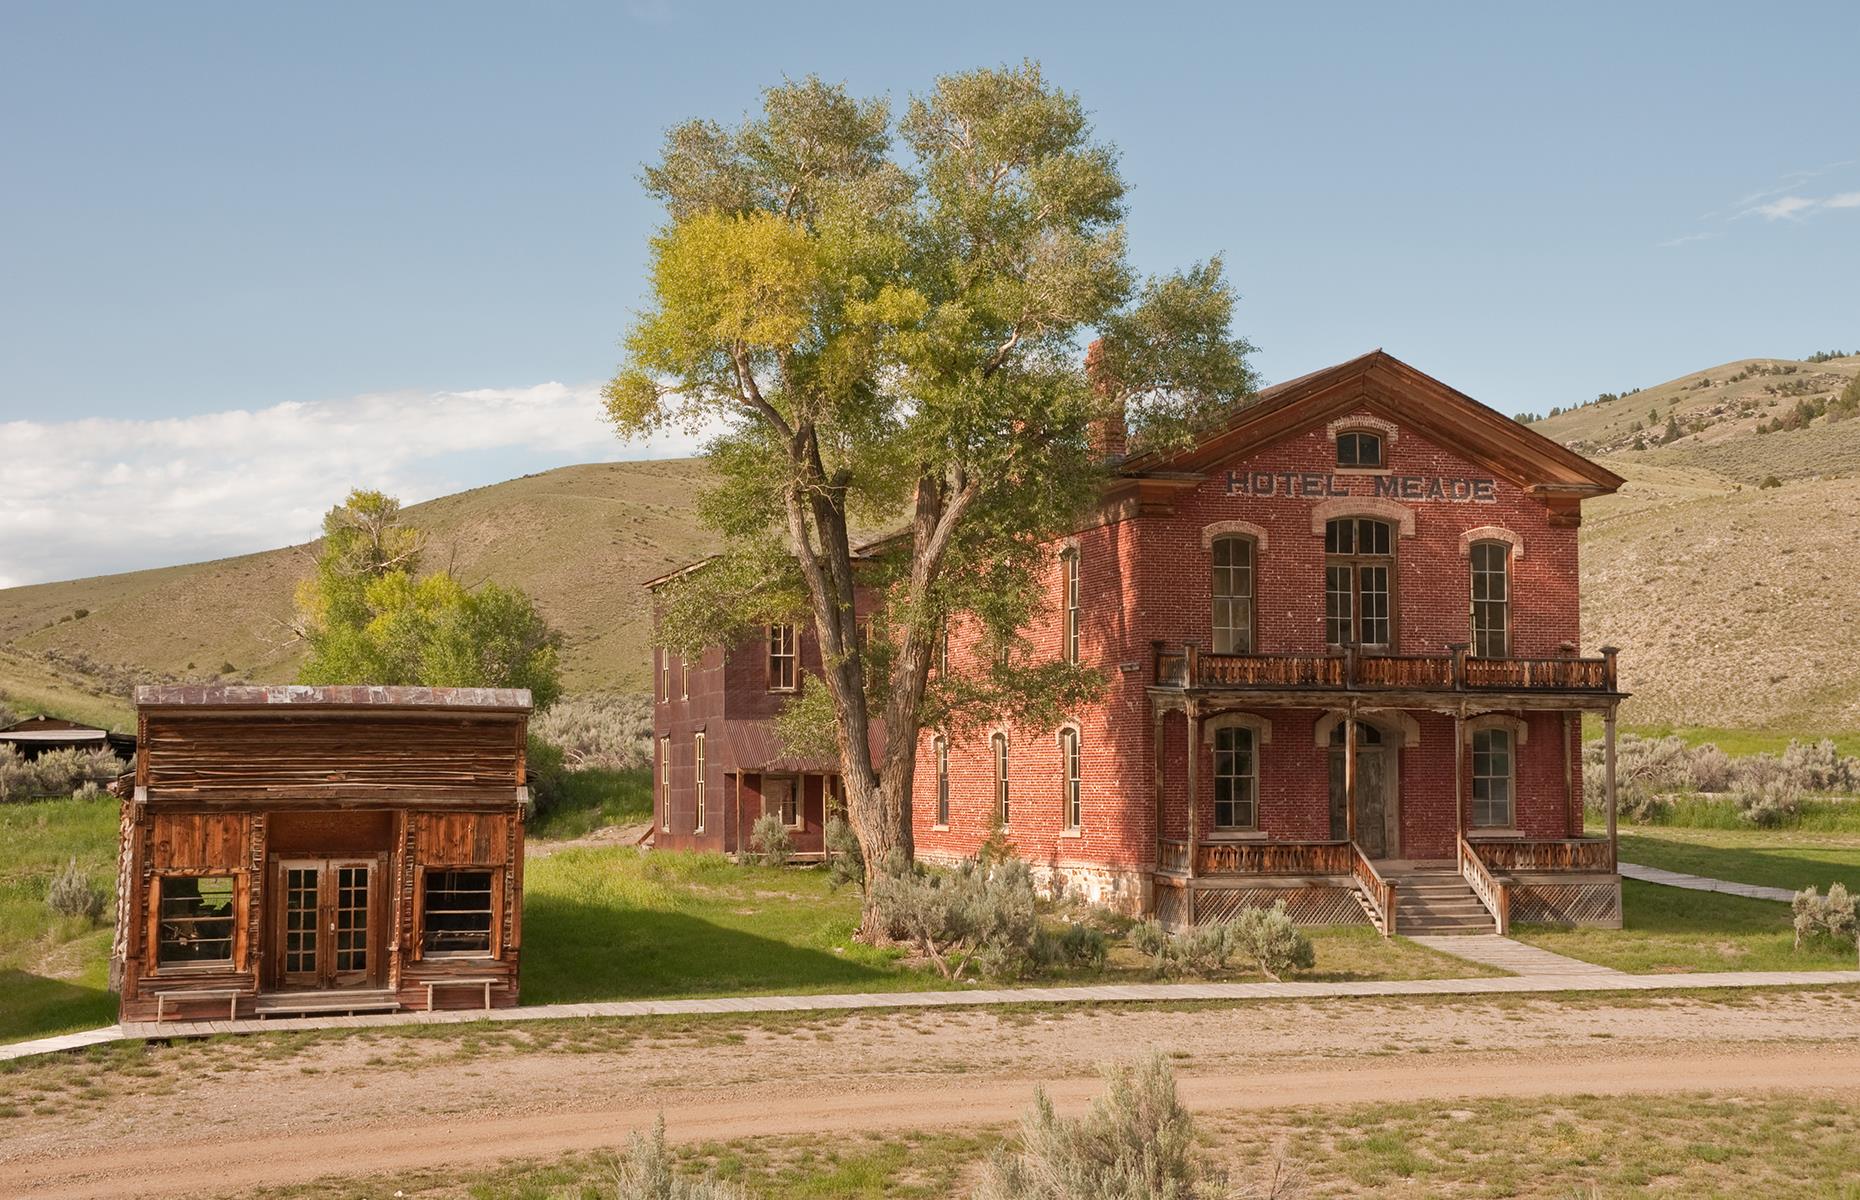 <p>A whopping 106 rickety ghost towns exist in Montana, one of the largest states in the USA, with a strong mining heritage to boot. The most picturesque of all is Bannack, which began life in the 1860s, when prospector John White struck gold. Although the value of gold declined, the town's beauty did not; now, visitors come to explore the 60 impressively preserved structures, which include a purportedly haunted historic courthouse. There are ghost tours in the fall too. </p>